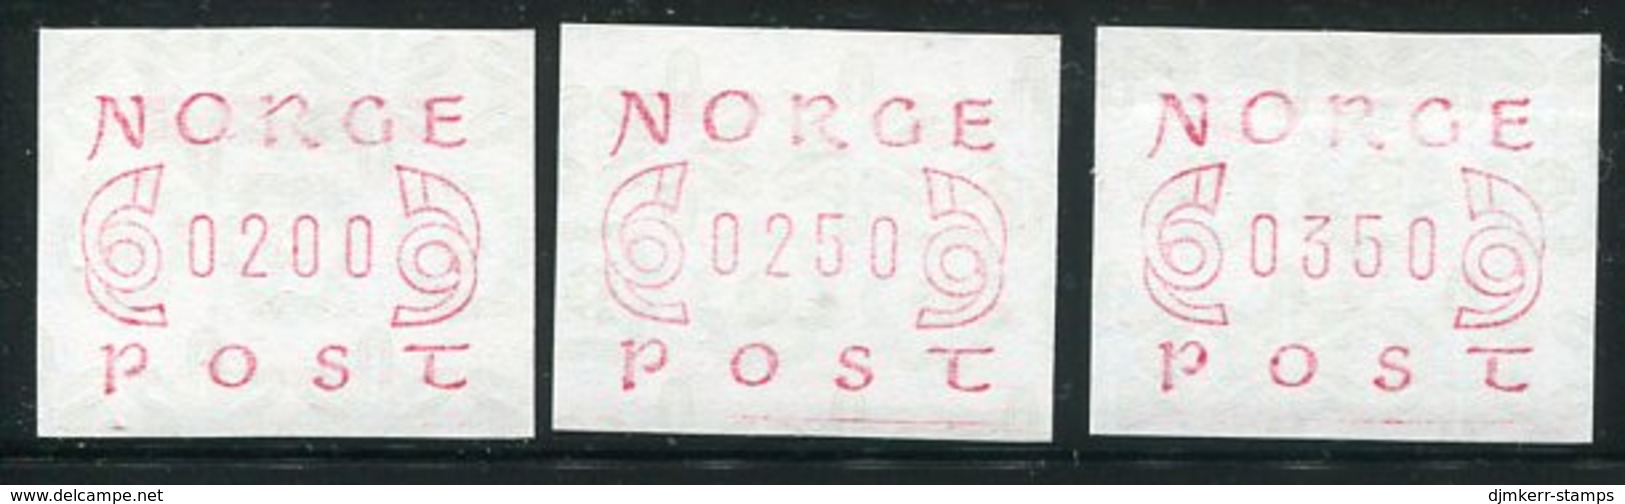 NORWAY 1980 Posthorns And Numeral Without Frame, Three Values  MNH / **.  Michel 2 - Machine Labels [ATM]